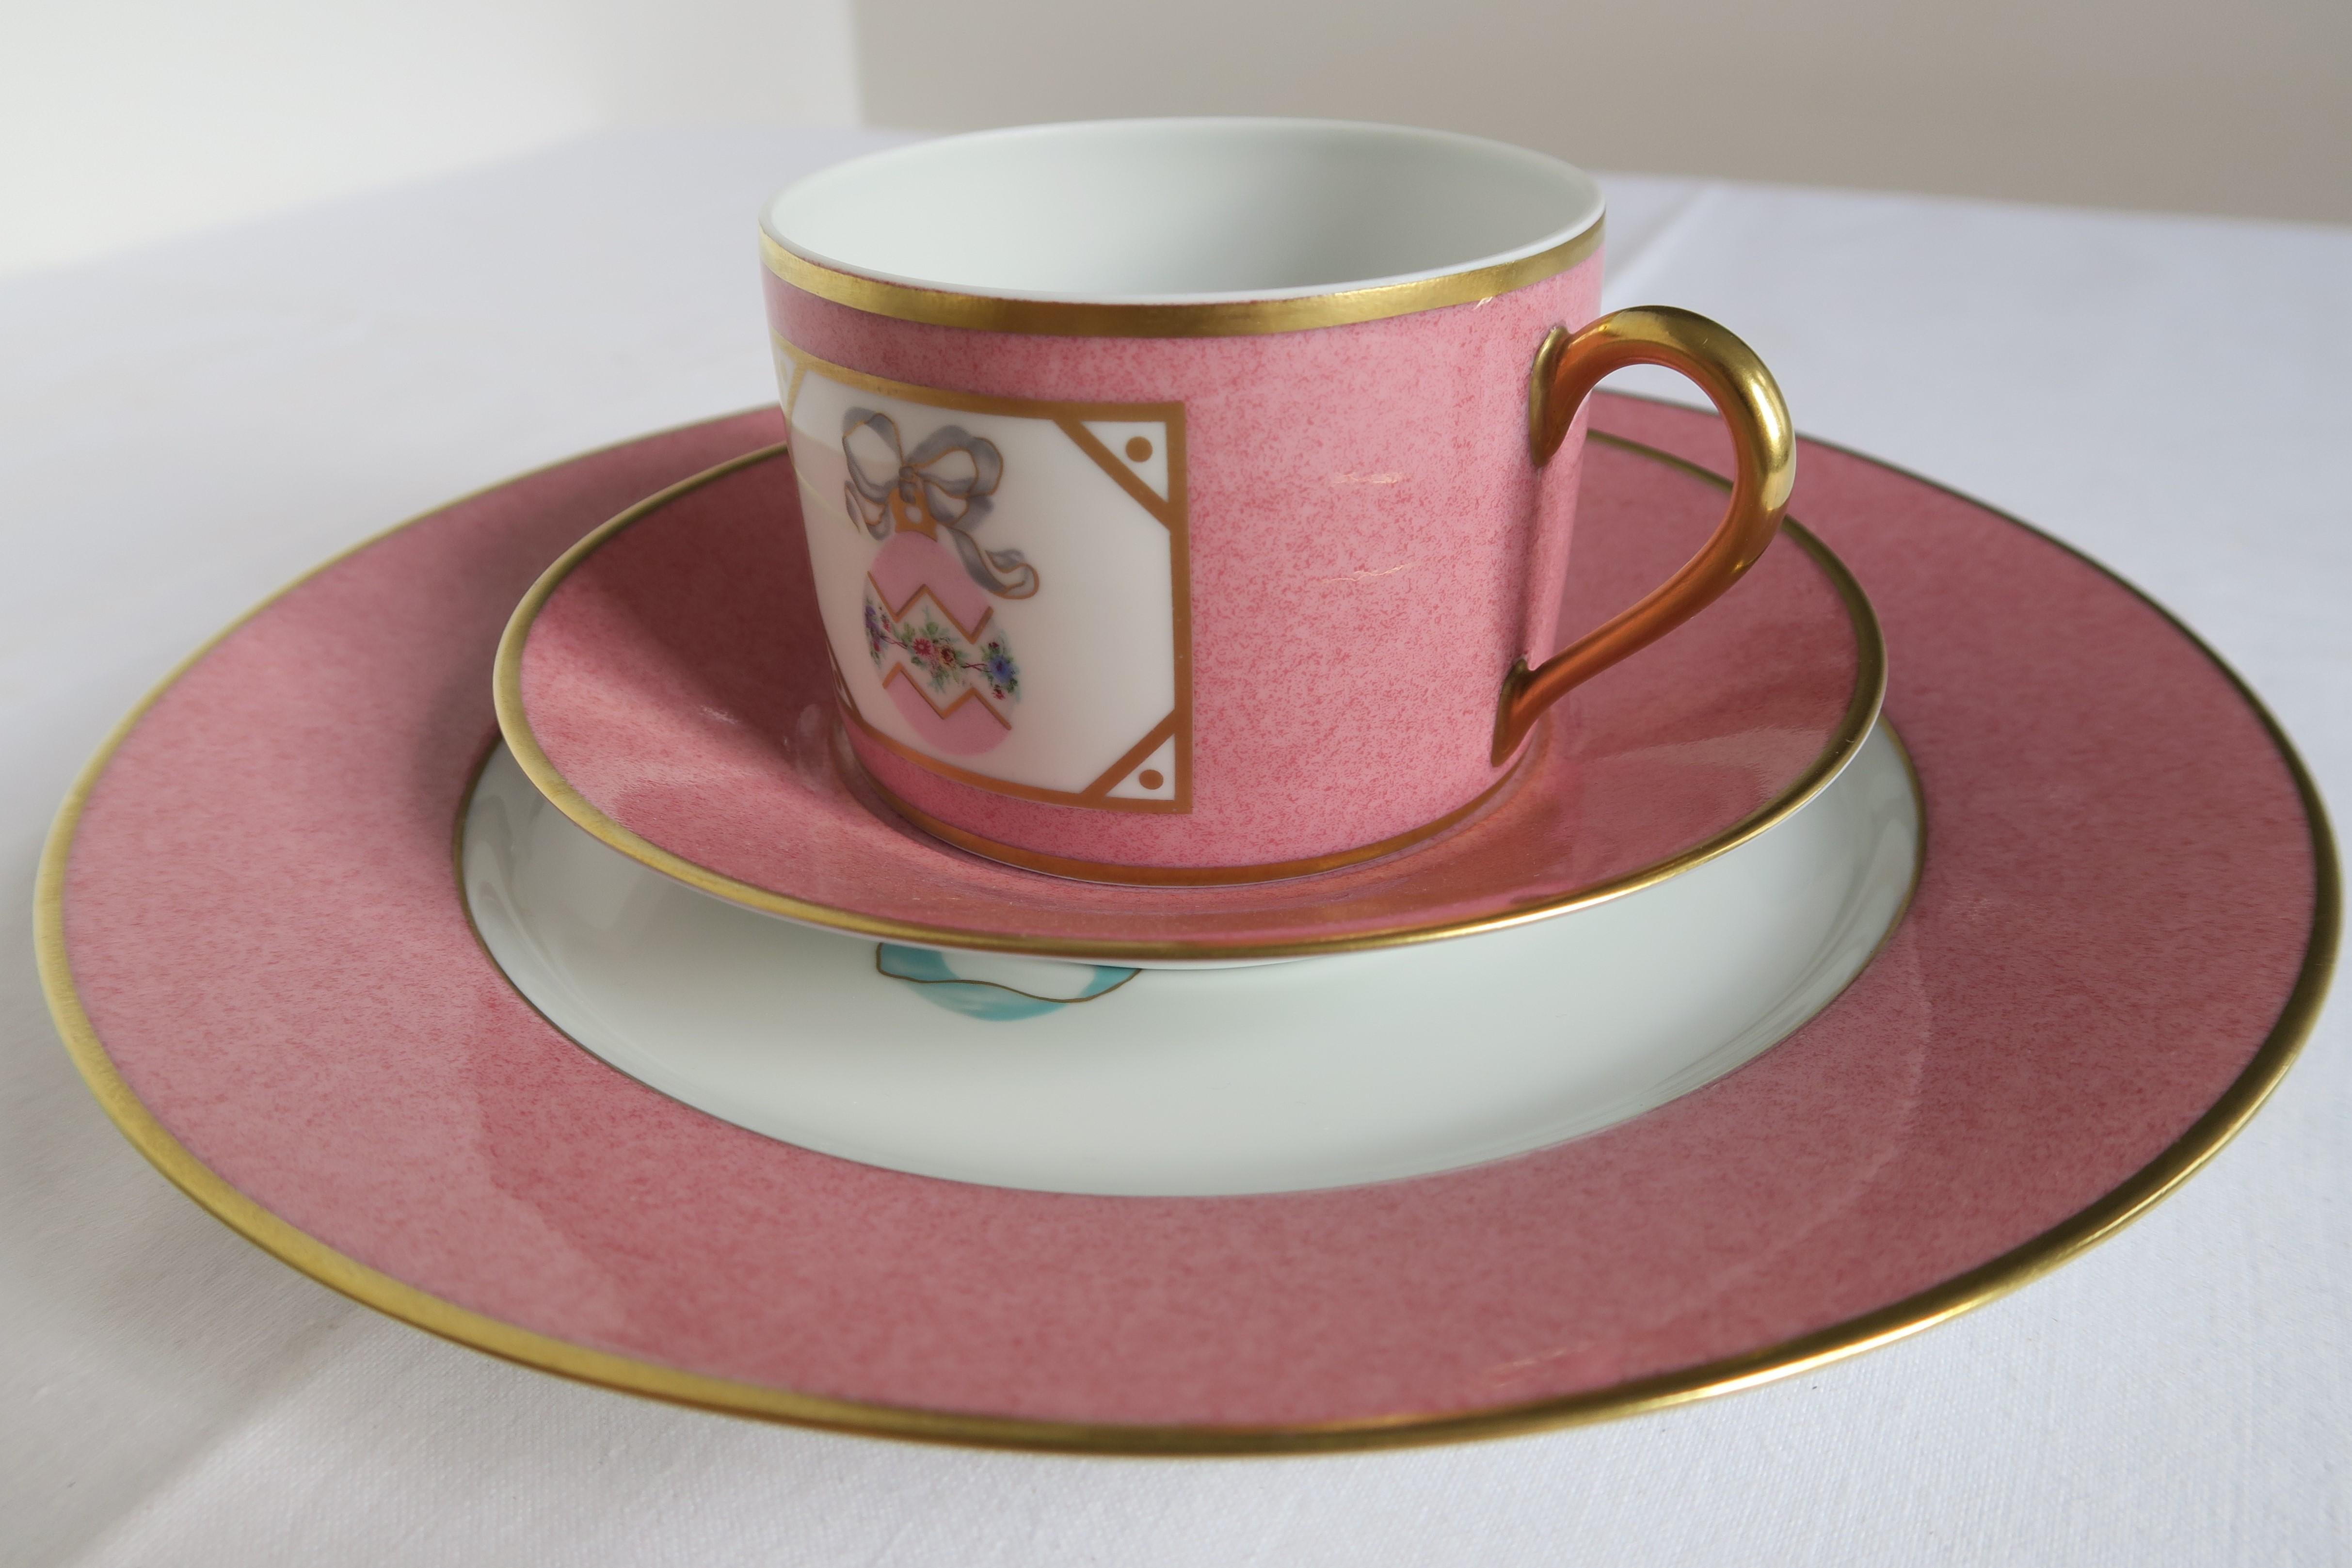 In this listing you will find a beautiful set of dishes by French Manufacturer and silver smith Puiforcat. It consists of a flat cup, saucer and a dessert plate made from the finest porcelain. All three pieces are stamped. The cup and the bigger